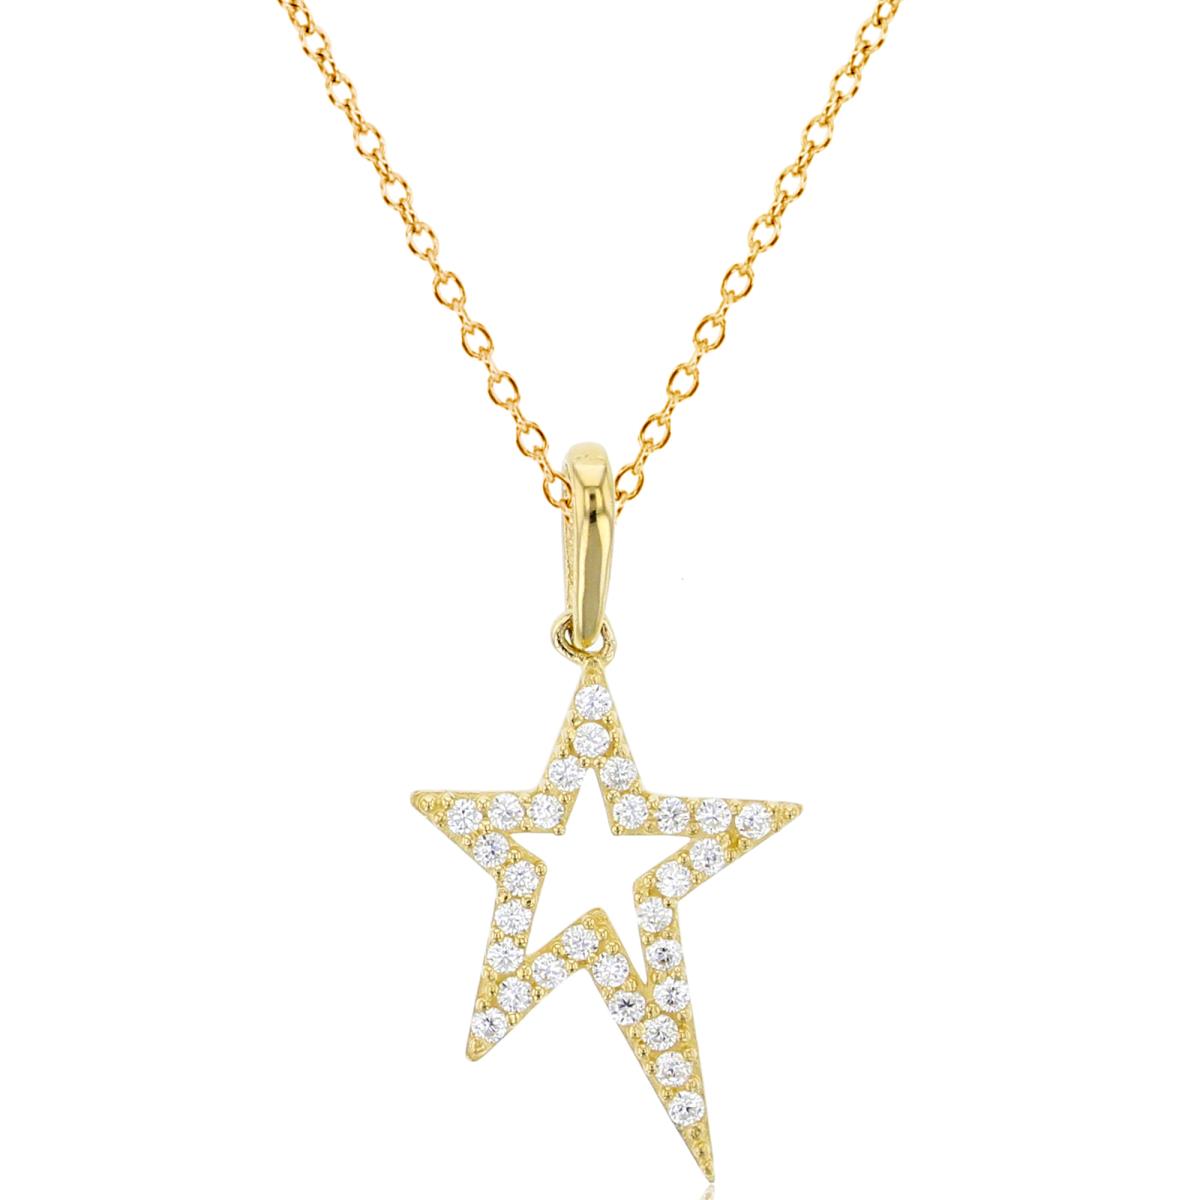 10K Yellow Gold Rnd CZ Open Star 18"Necklace